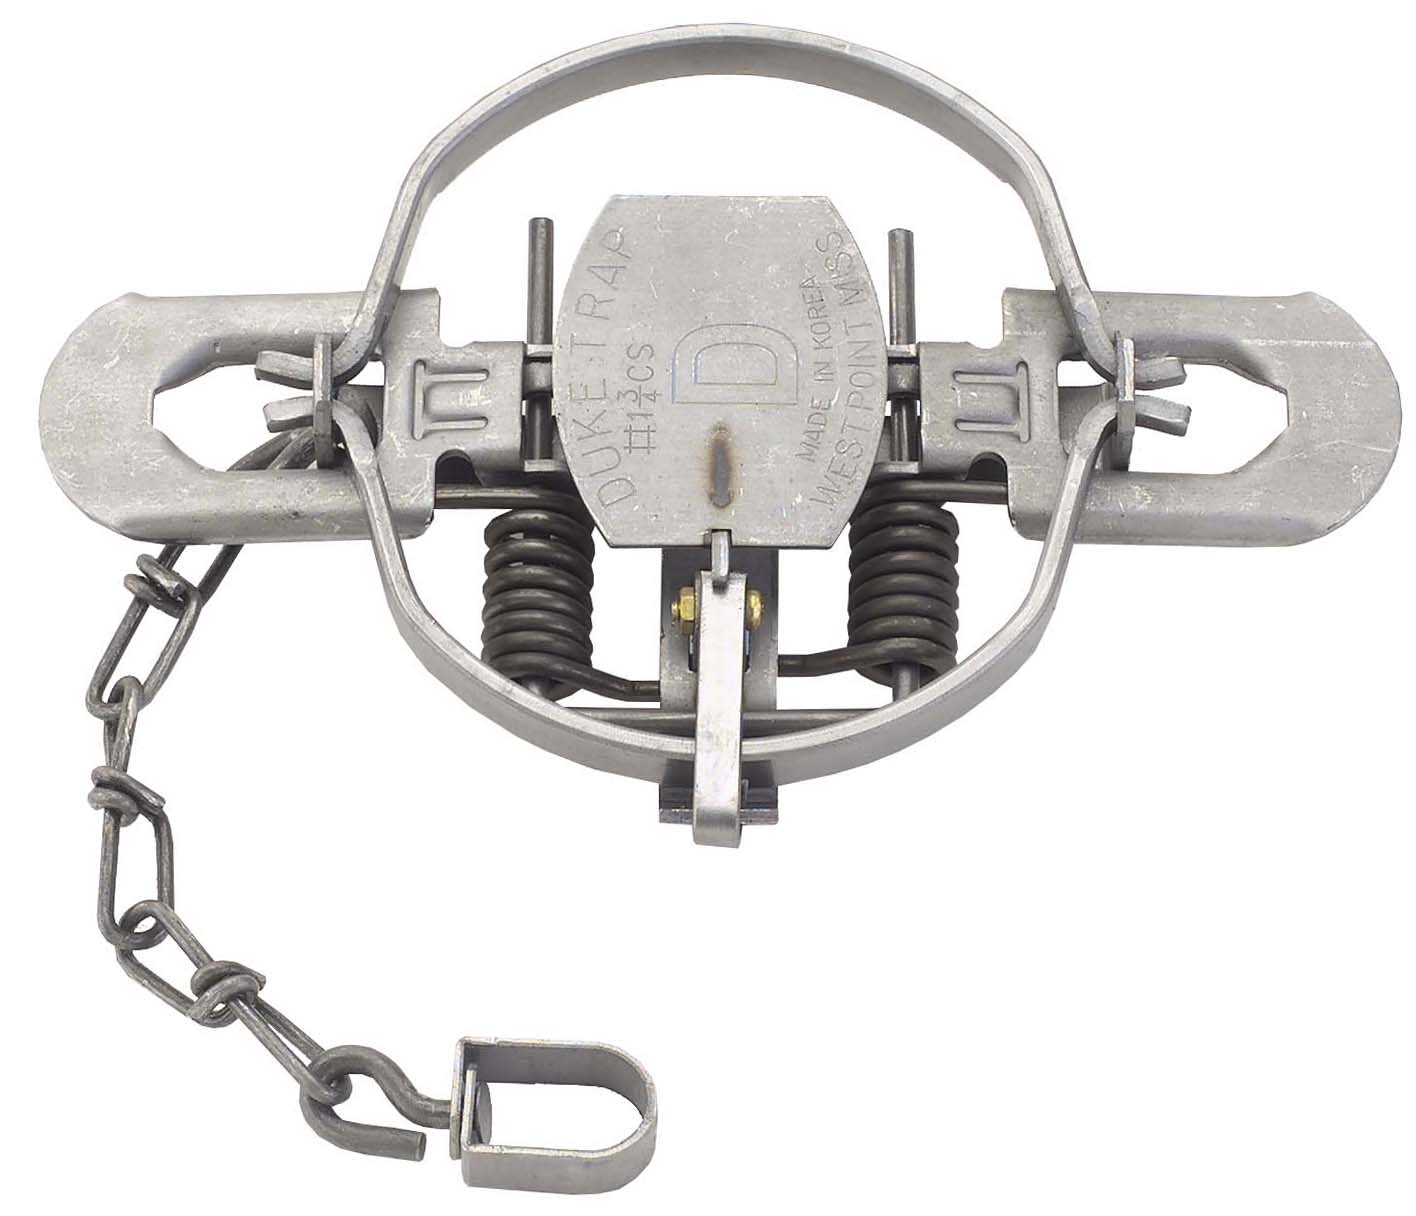 3 DUKE COIL SPRING TRAP OFFSET JAW NO 